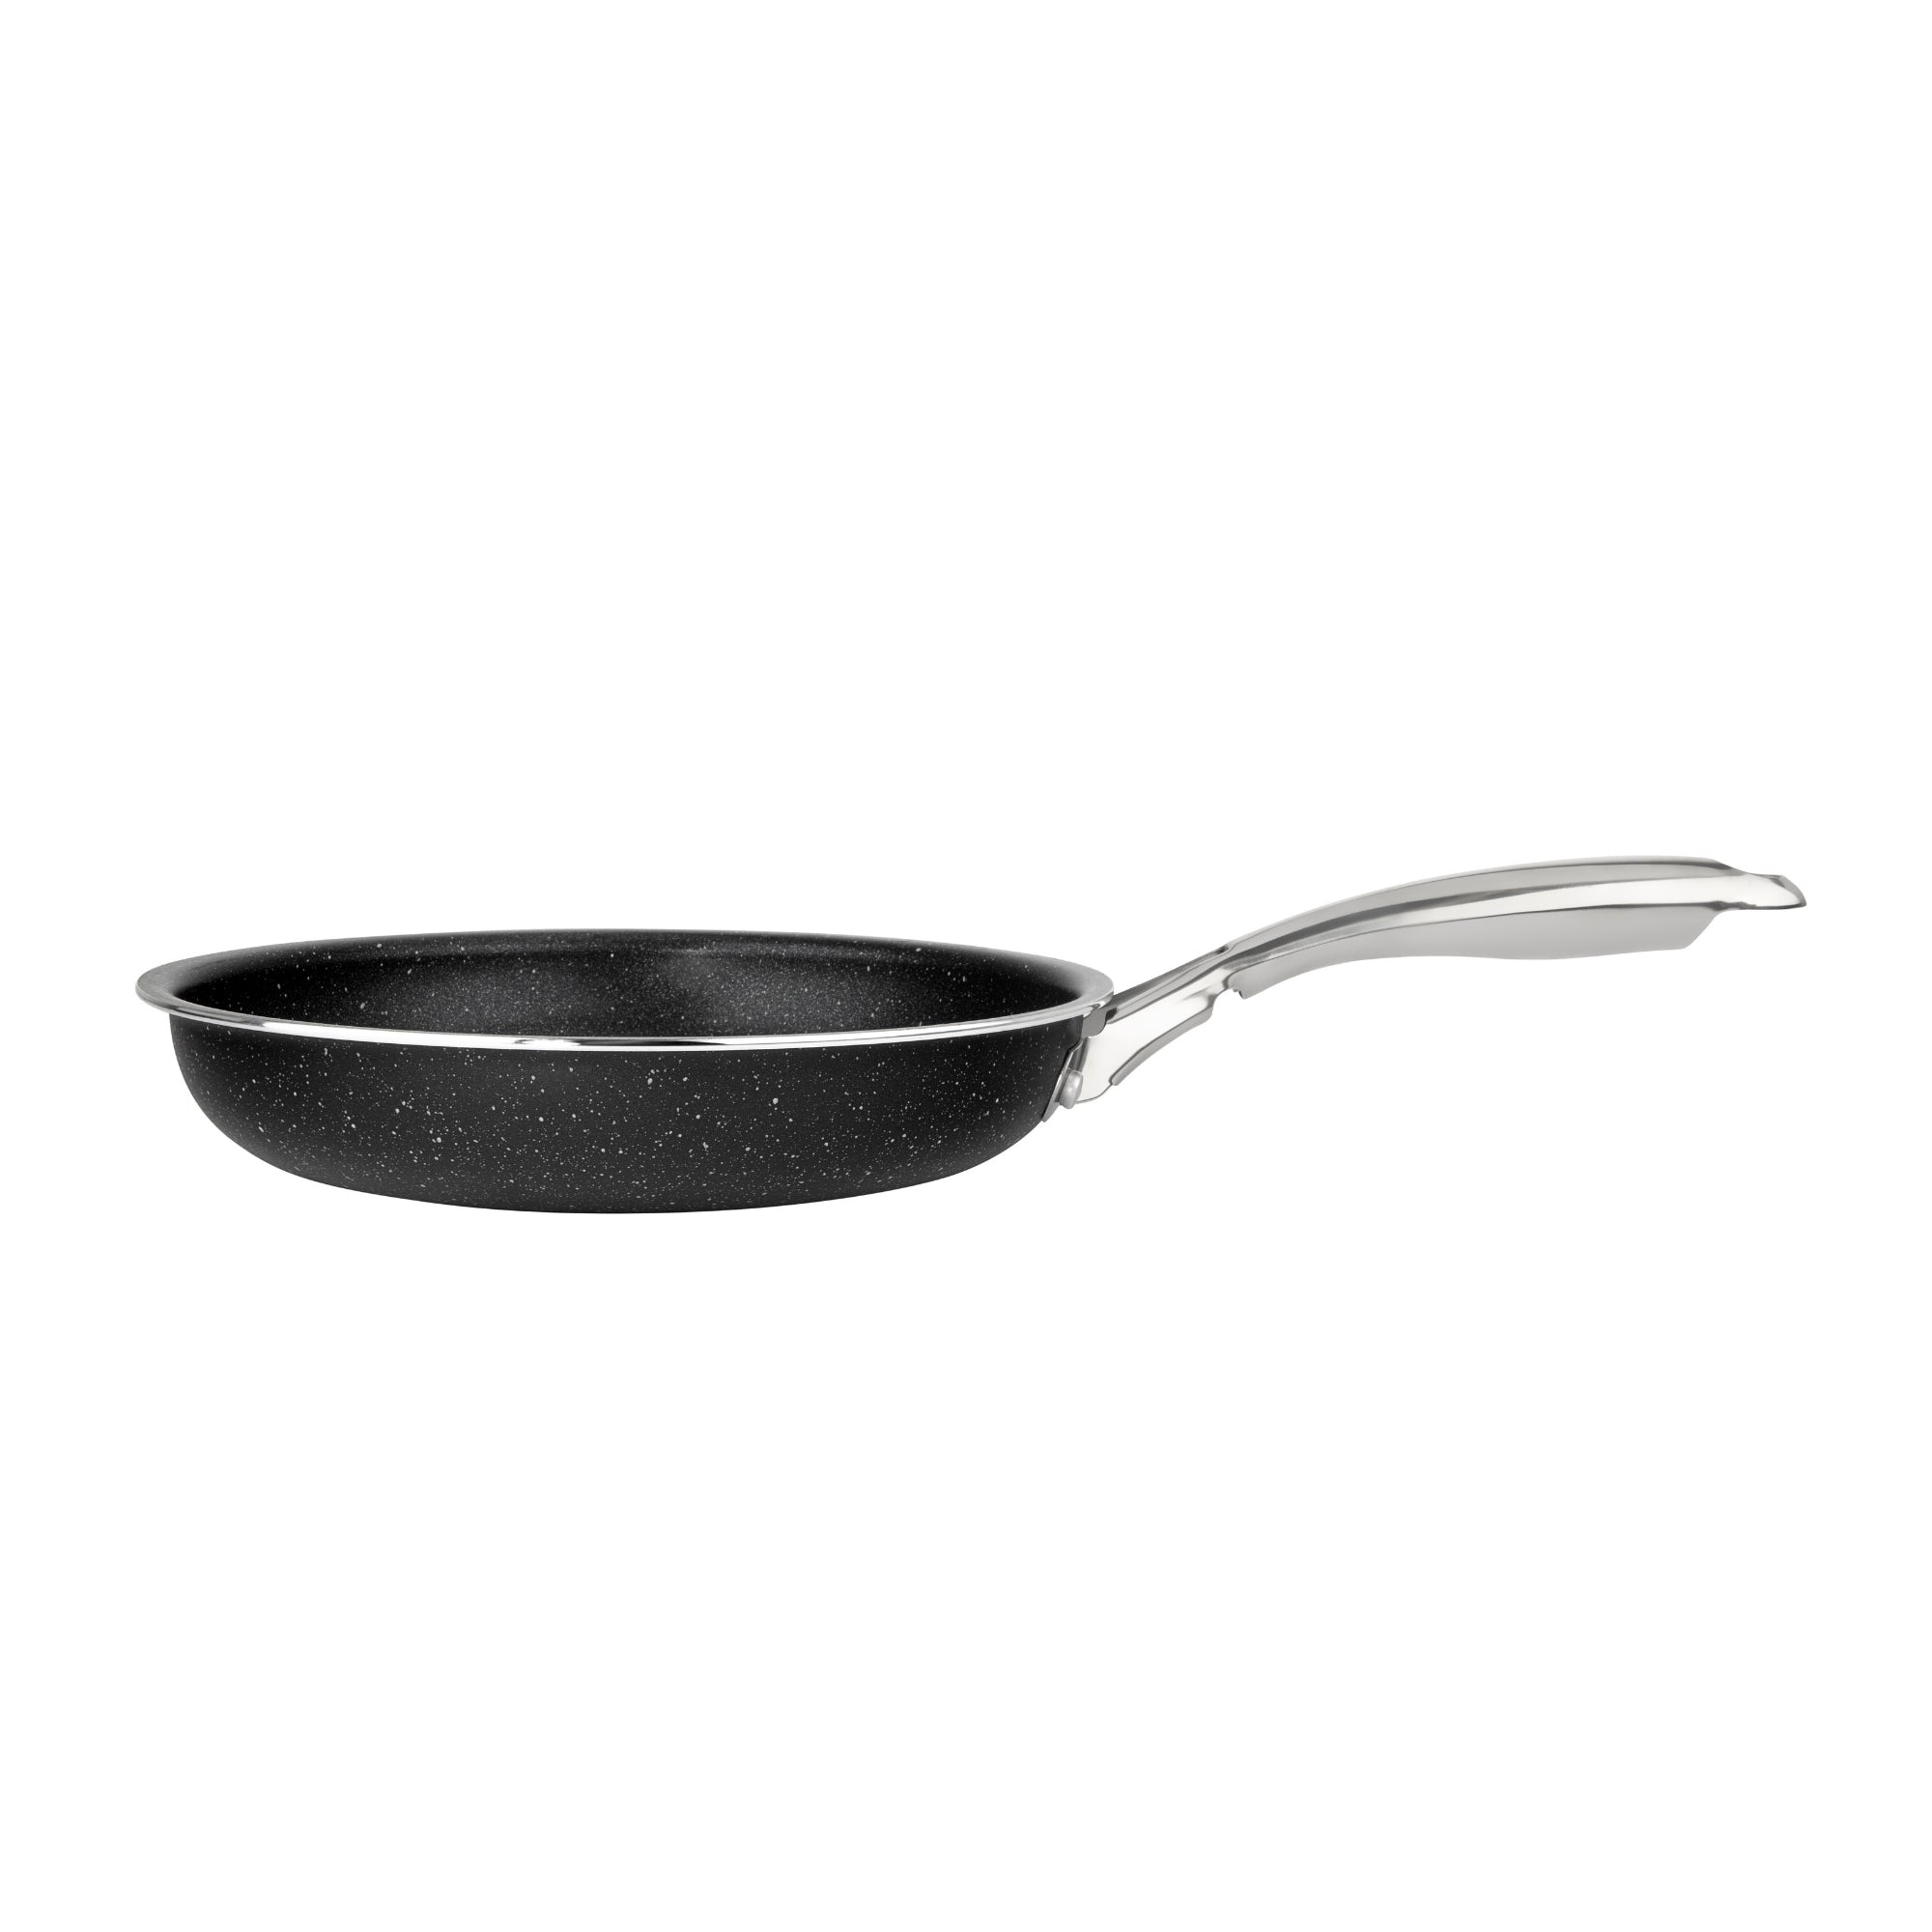 Stainless Steel Fry Pan - Non-Stick & Induction Ready - Round